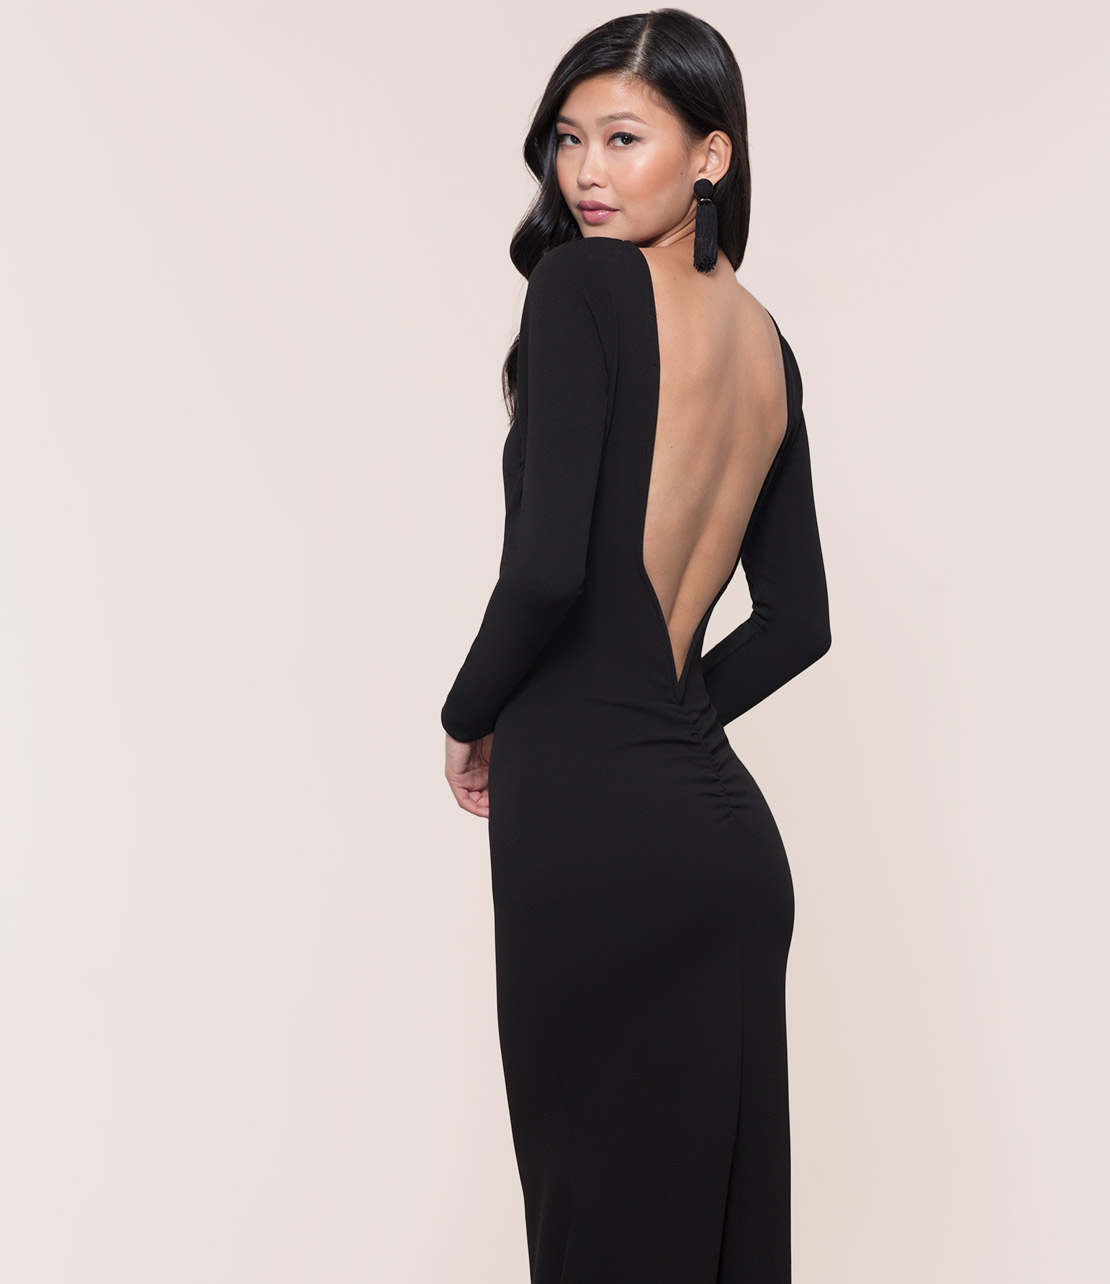 How To Wear Black Backless Dress